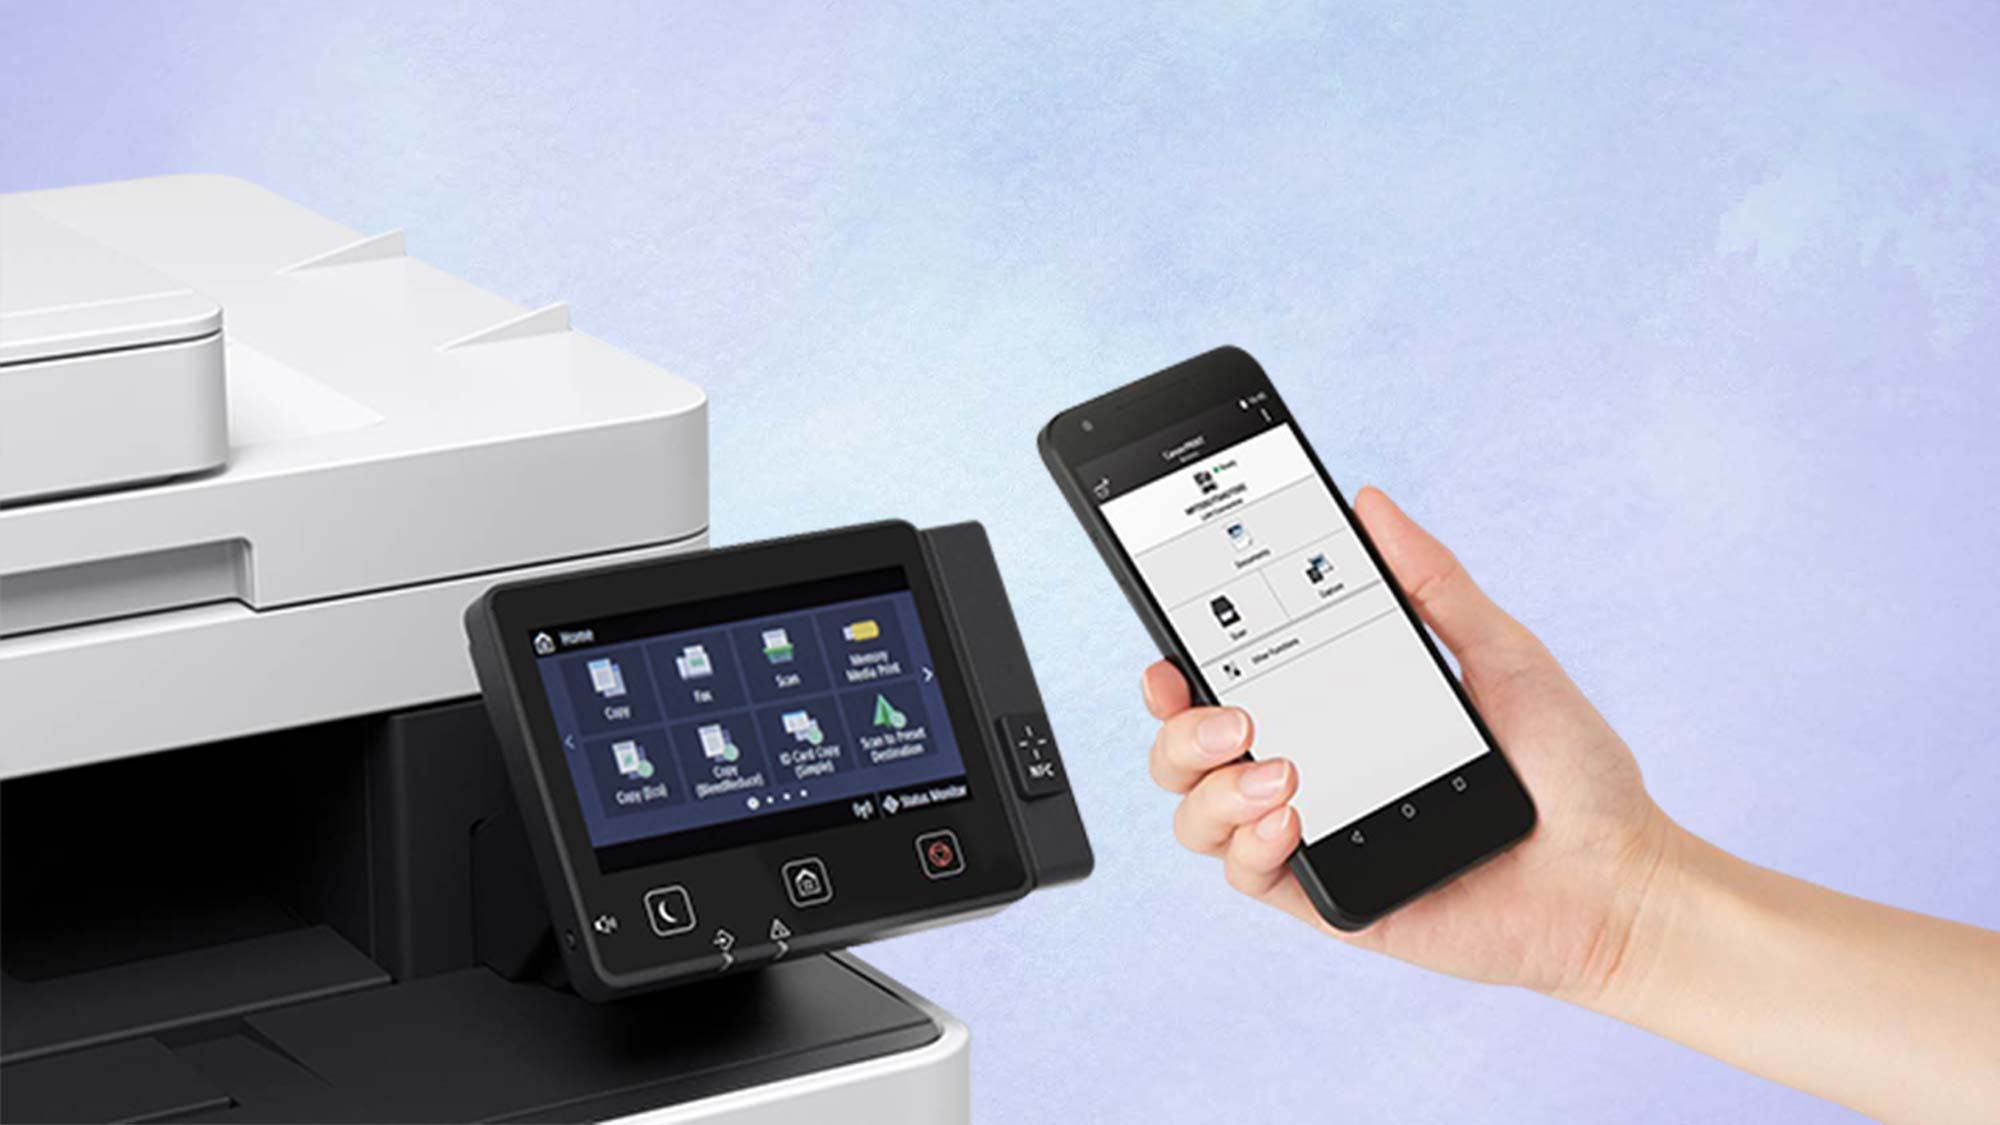 Ellers restaurant spørgeskema Here's how to print from an Android phone or tablet | Tom's Guide